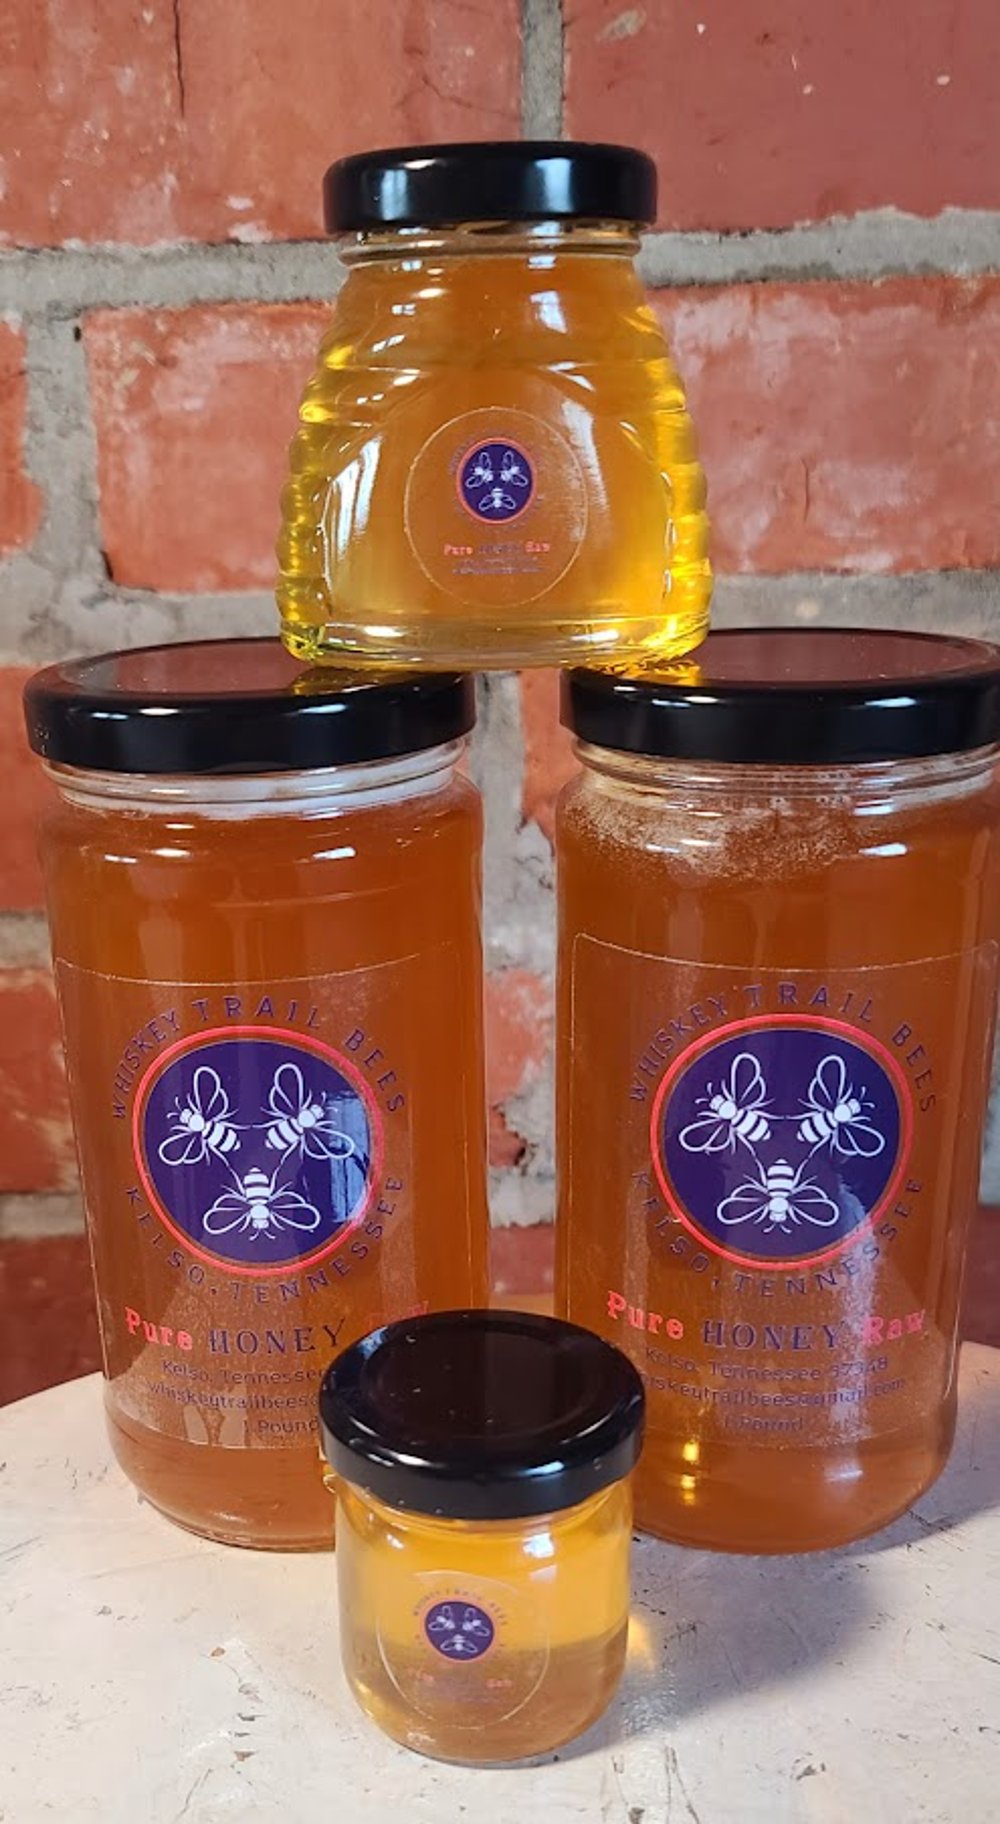 A collection of the various honey products that we sell